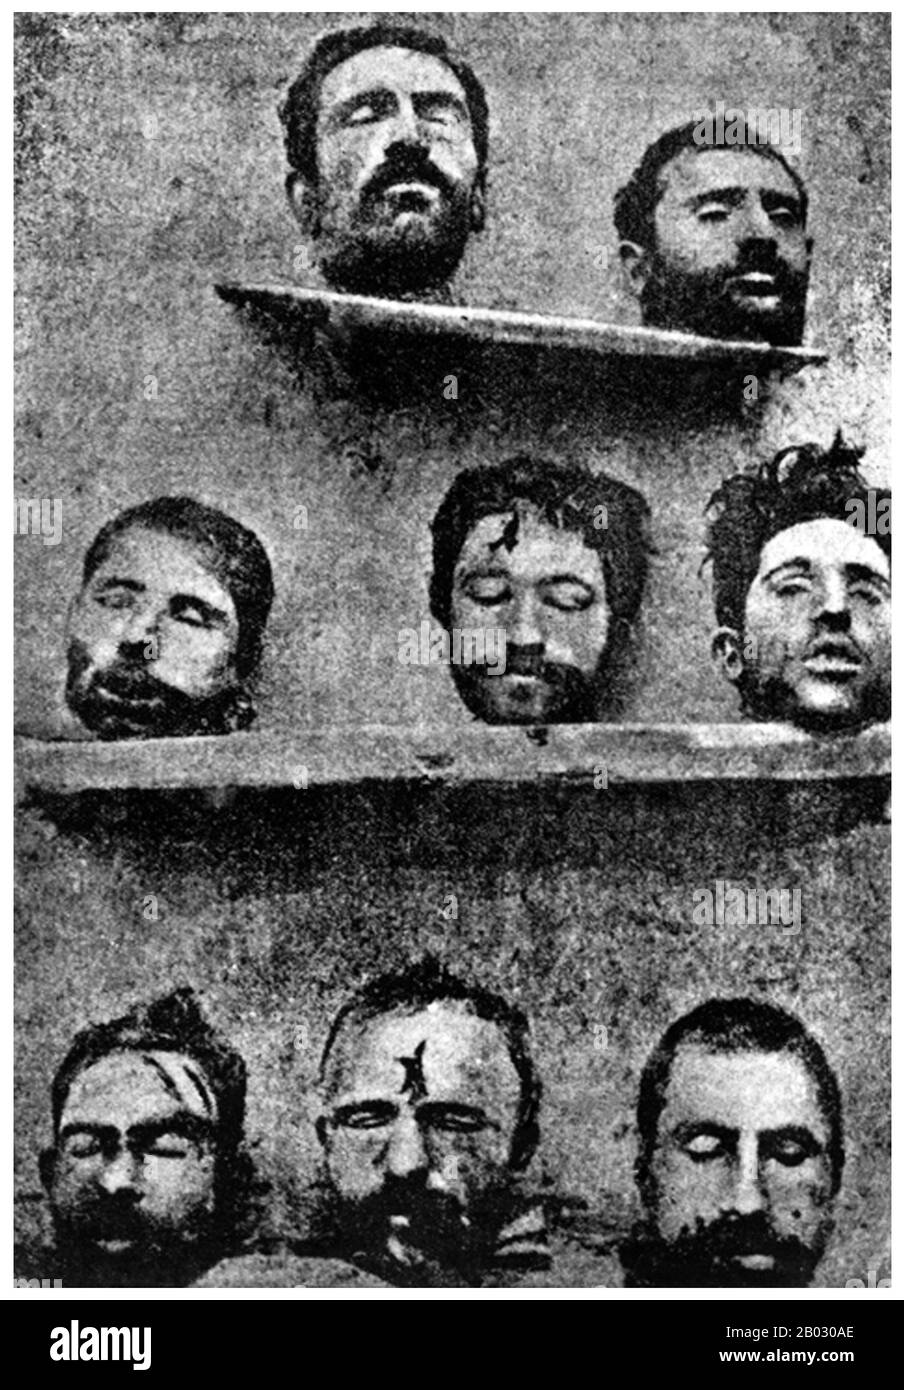 Turkey / Armenia: 'The Heads of Eight Armenian Professors Massacred by the Turks', Amenun Tarets'uyts'e (Armenian journal), 1921. The Armenian Genocide refers to the deliberate and systematic destruction of the Armenian population of the Ottoman Empire during and just after World War I. It was implemented through wholesale massacres and deportations, with the deportations consisting of forced marches under conditions designed to lead to the death of the deportees. The total number of resulting Armenian deaths is generally held to have been between one and one and a half million. Stock Photo